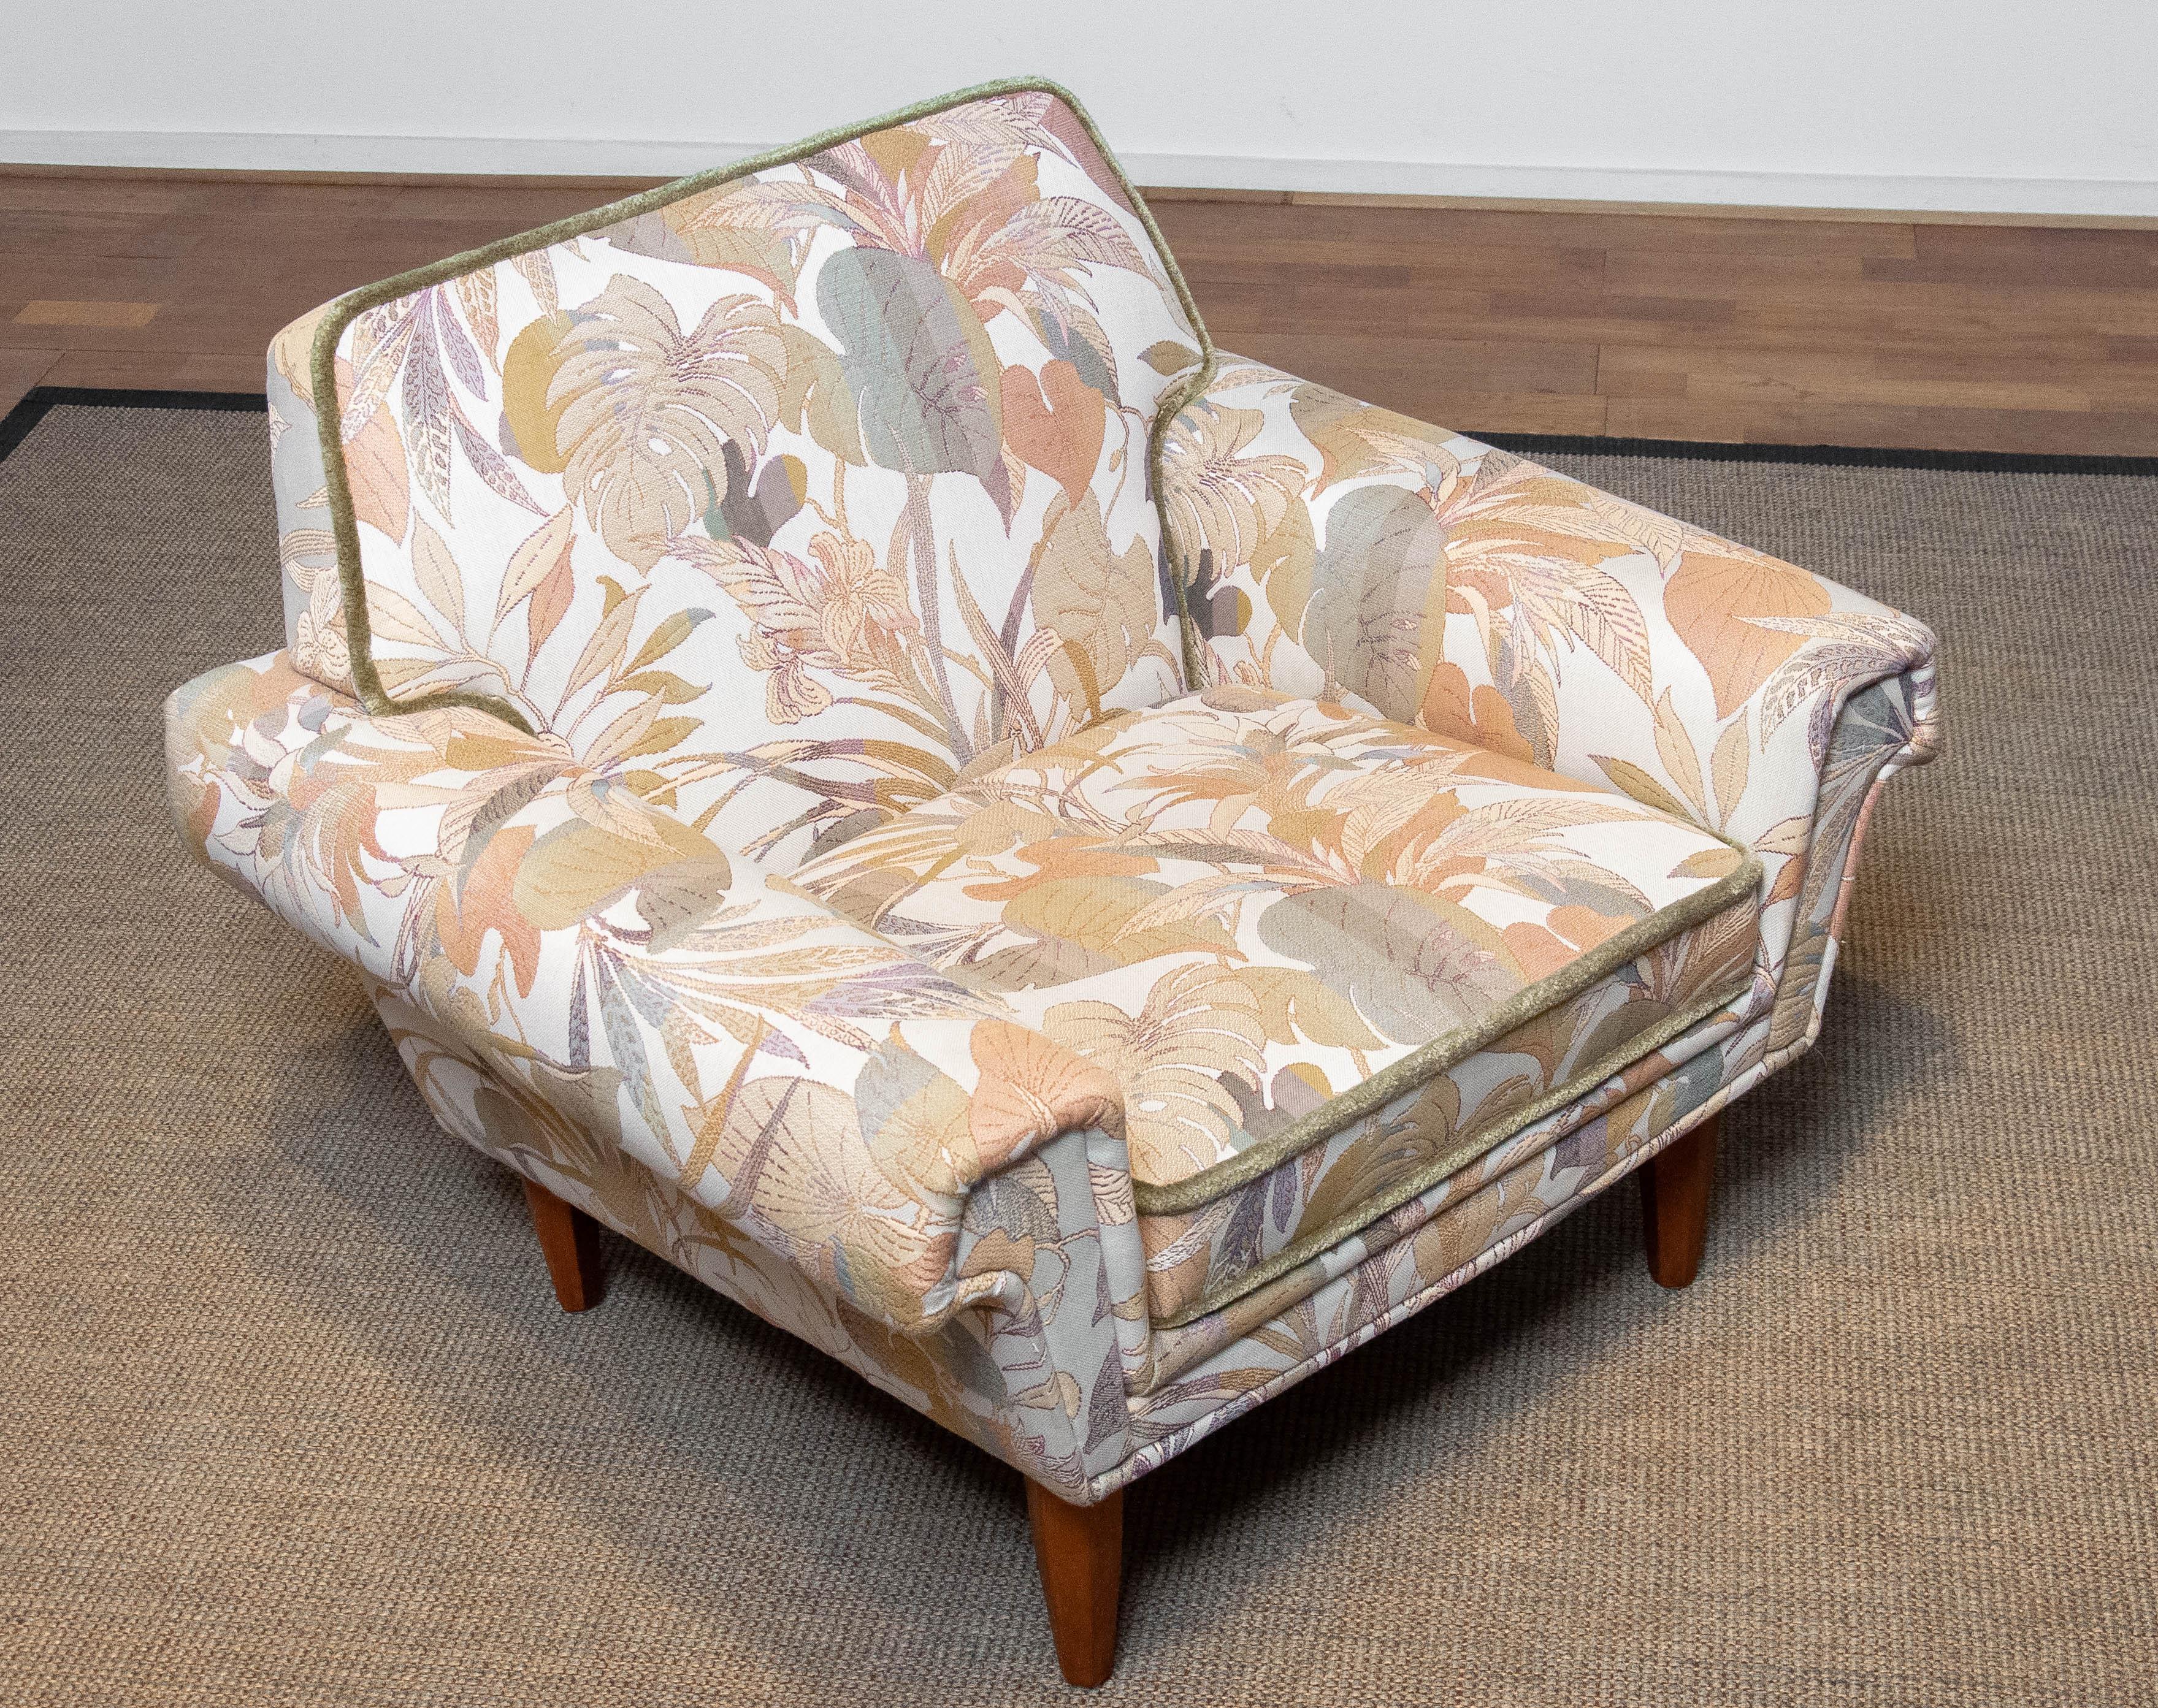 Danish Low Back Lounge Chair Upholstered Floral Jacquard Fabric from the 1970's For Sale 4